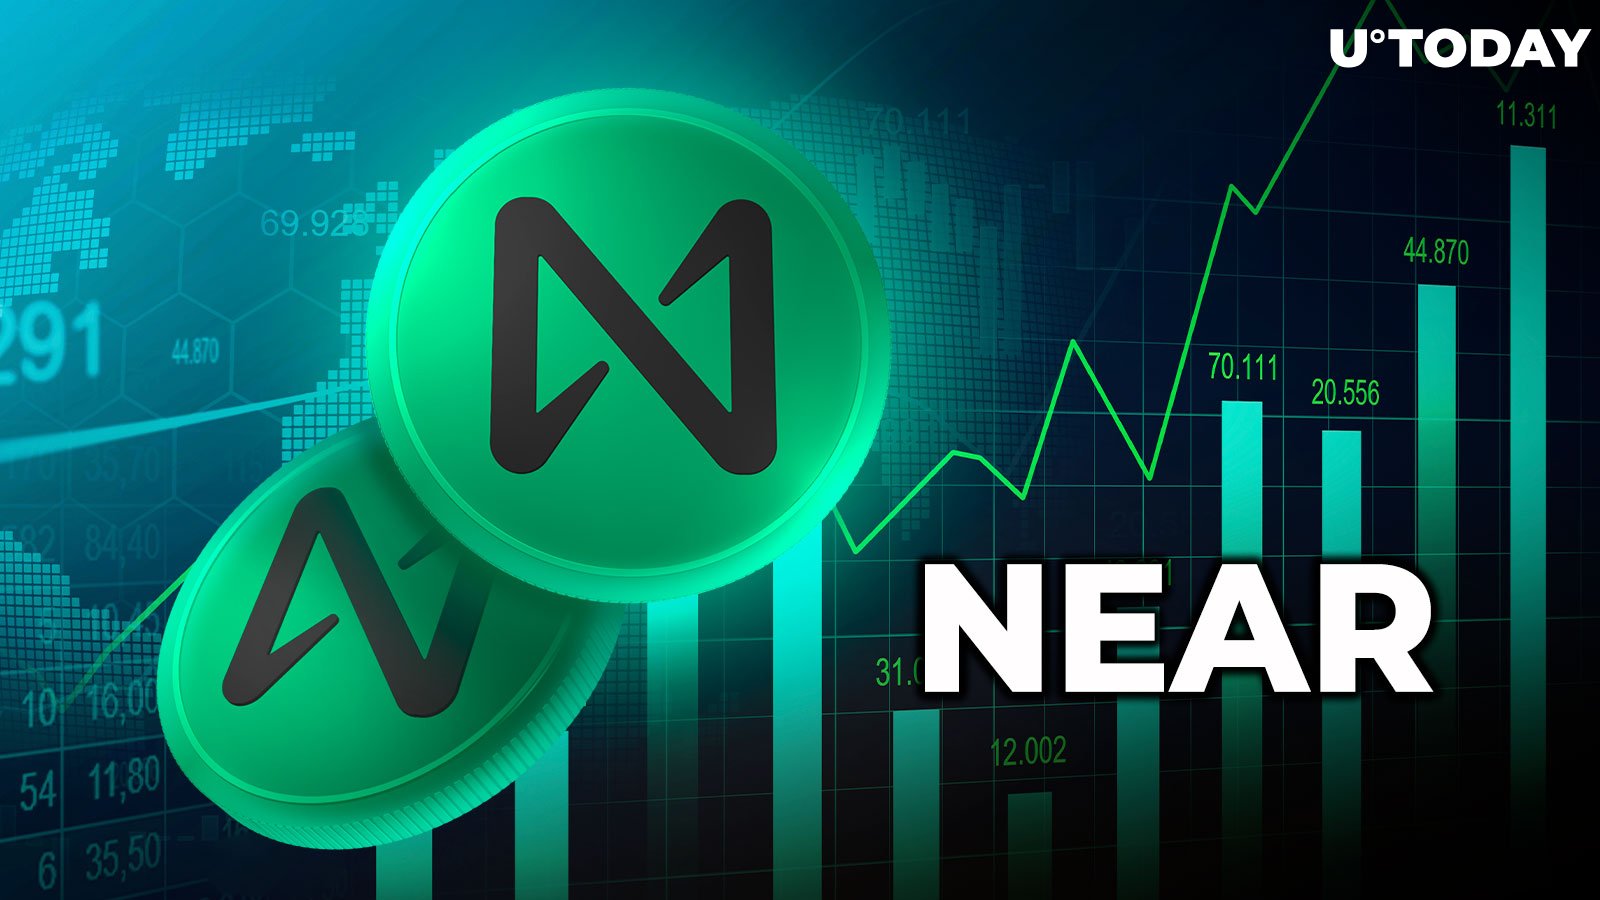 NEAR Protocol (NEAR) Surges Over 17% as Total Open Interest Hits $117.8 Million